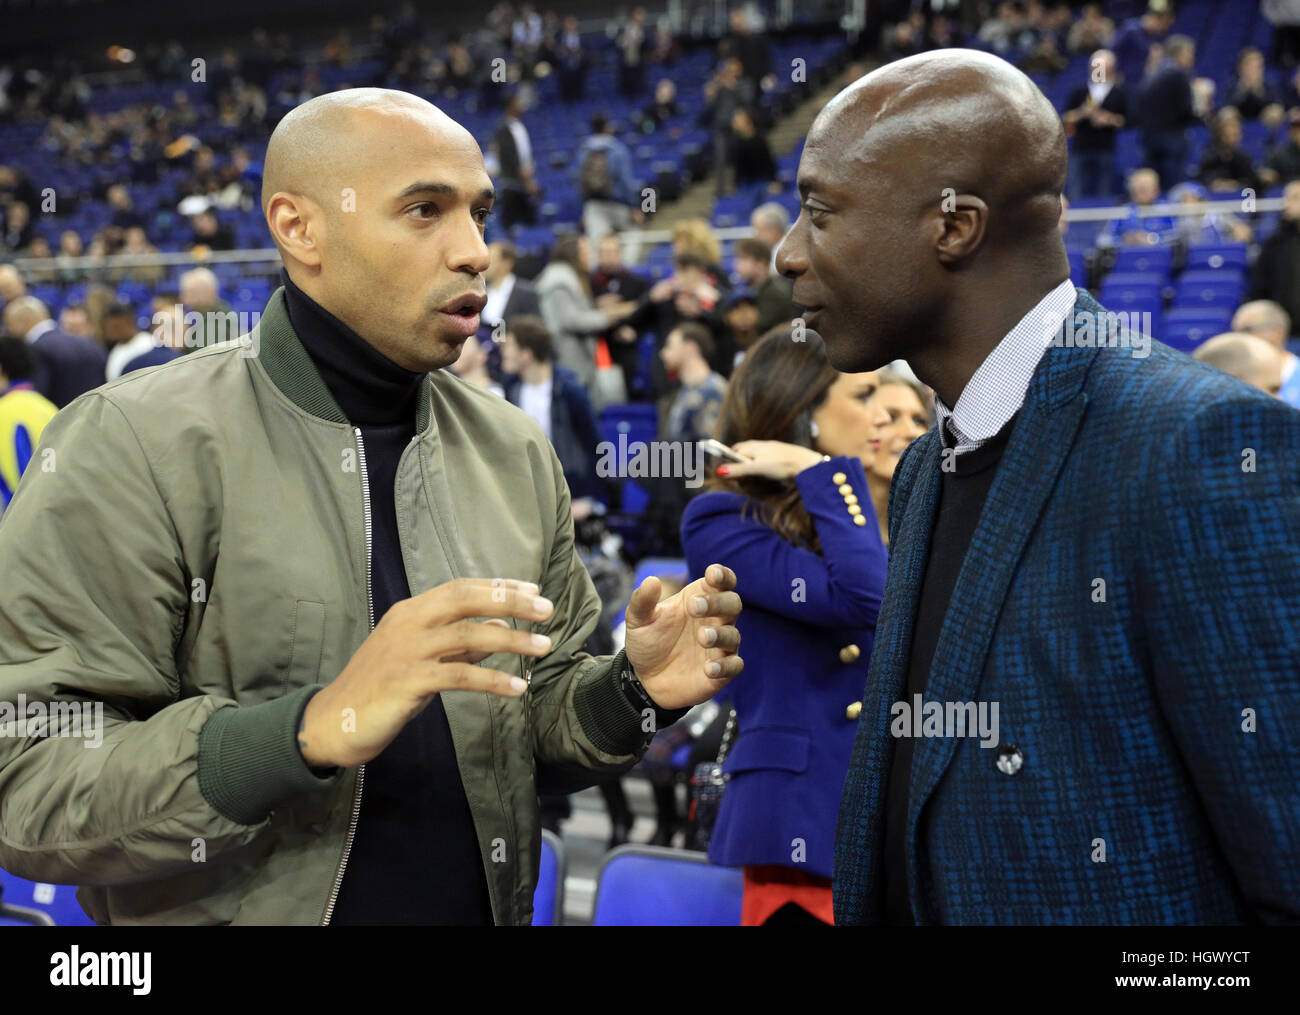 Thierry Henry (left) with Fashion Designer Oswald Boateng during